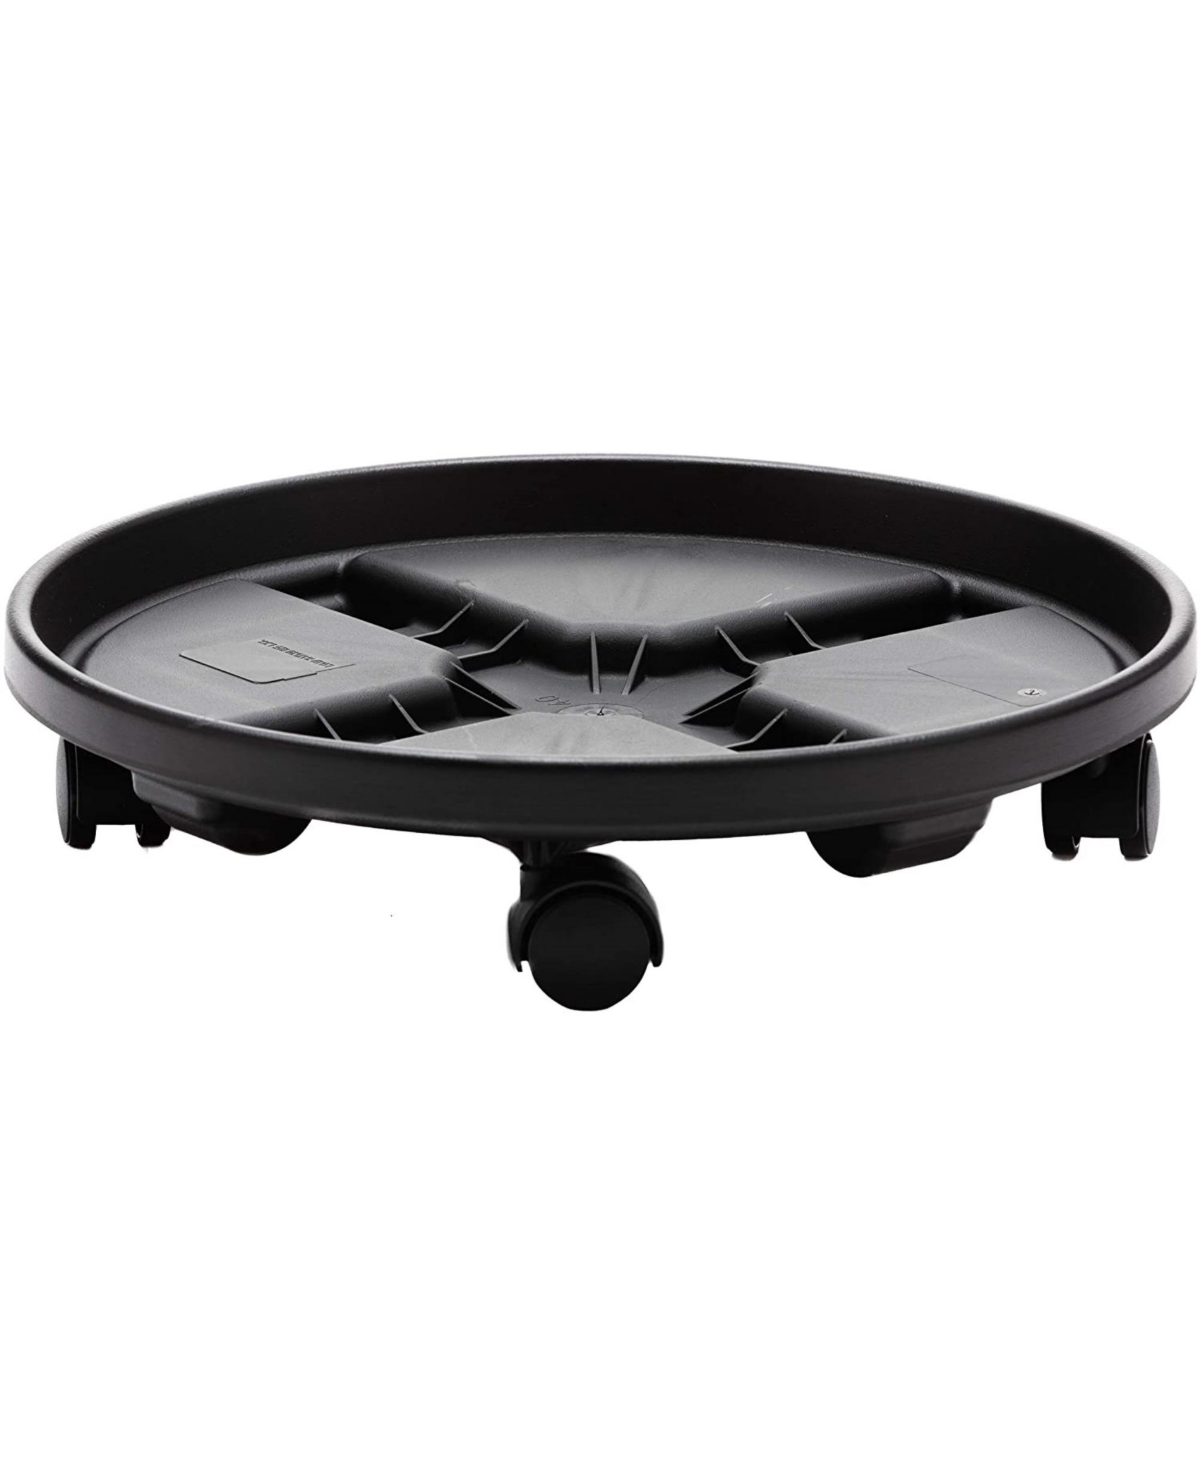 Plant Caddie With Saucer Tray and Wheels, Round, Black 16 Inches - Black